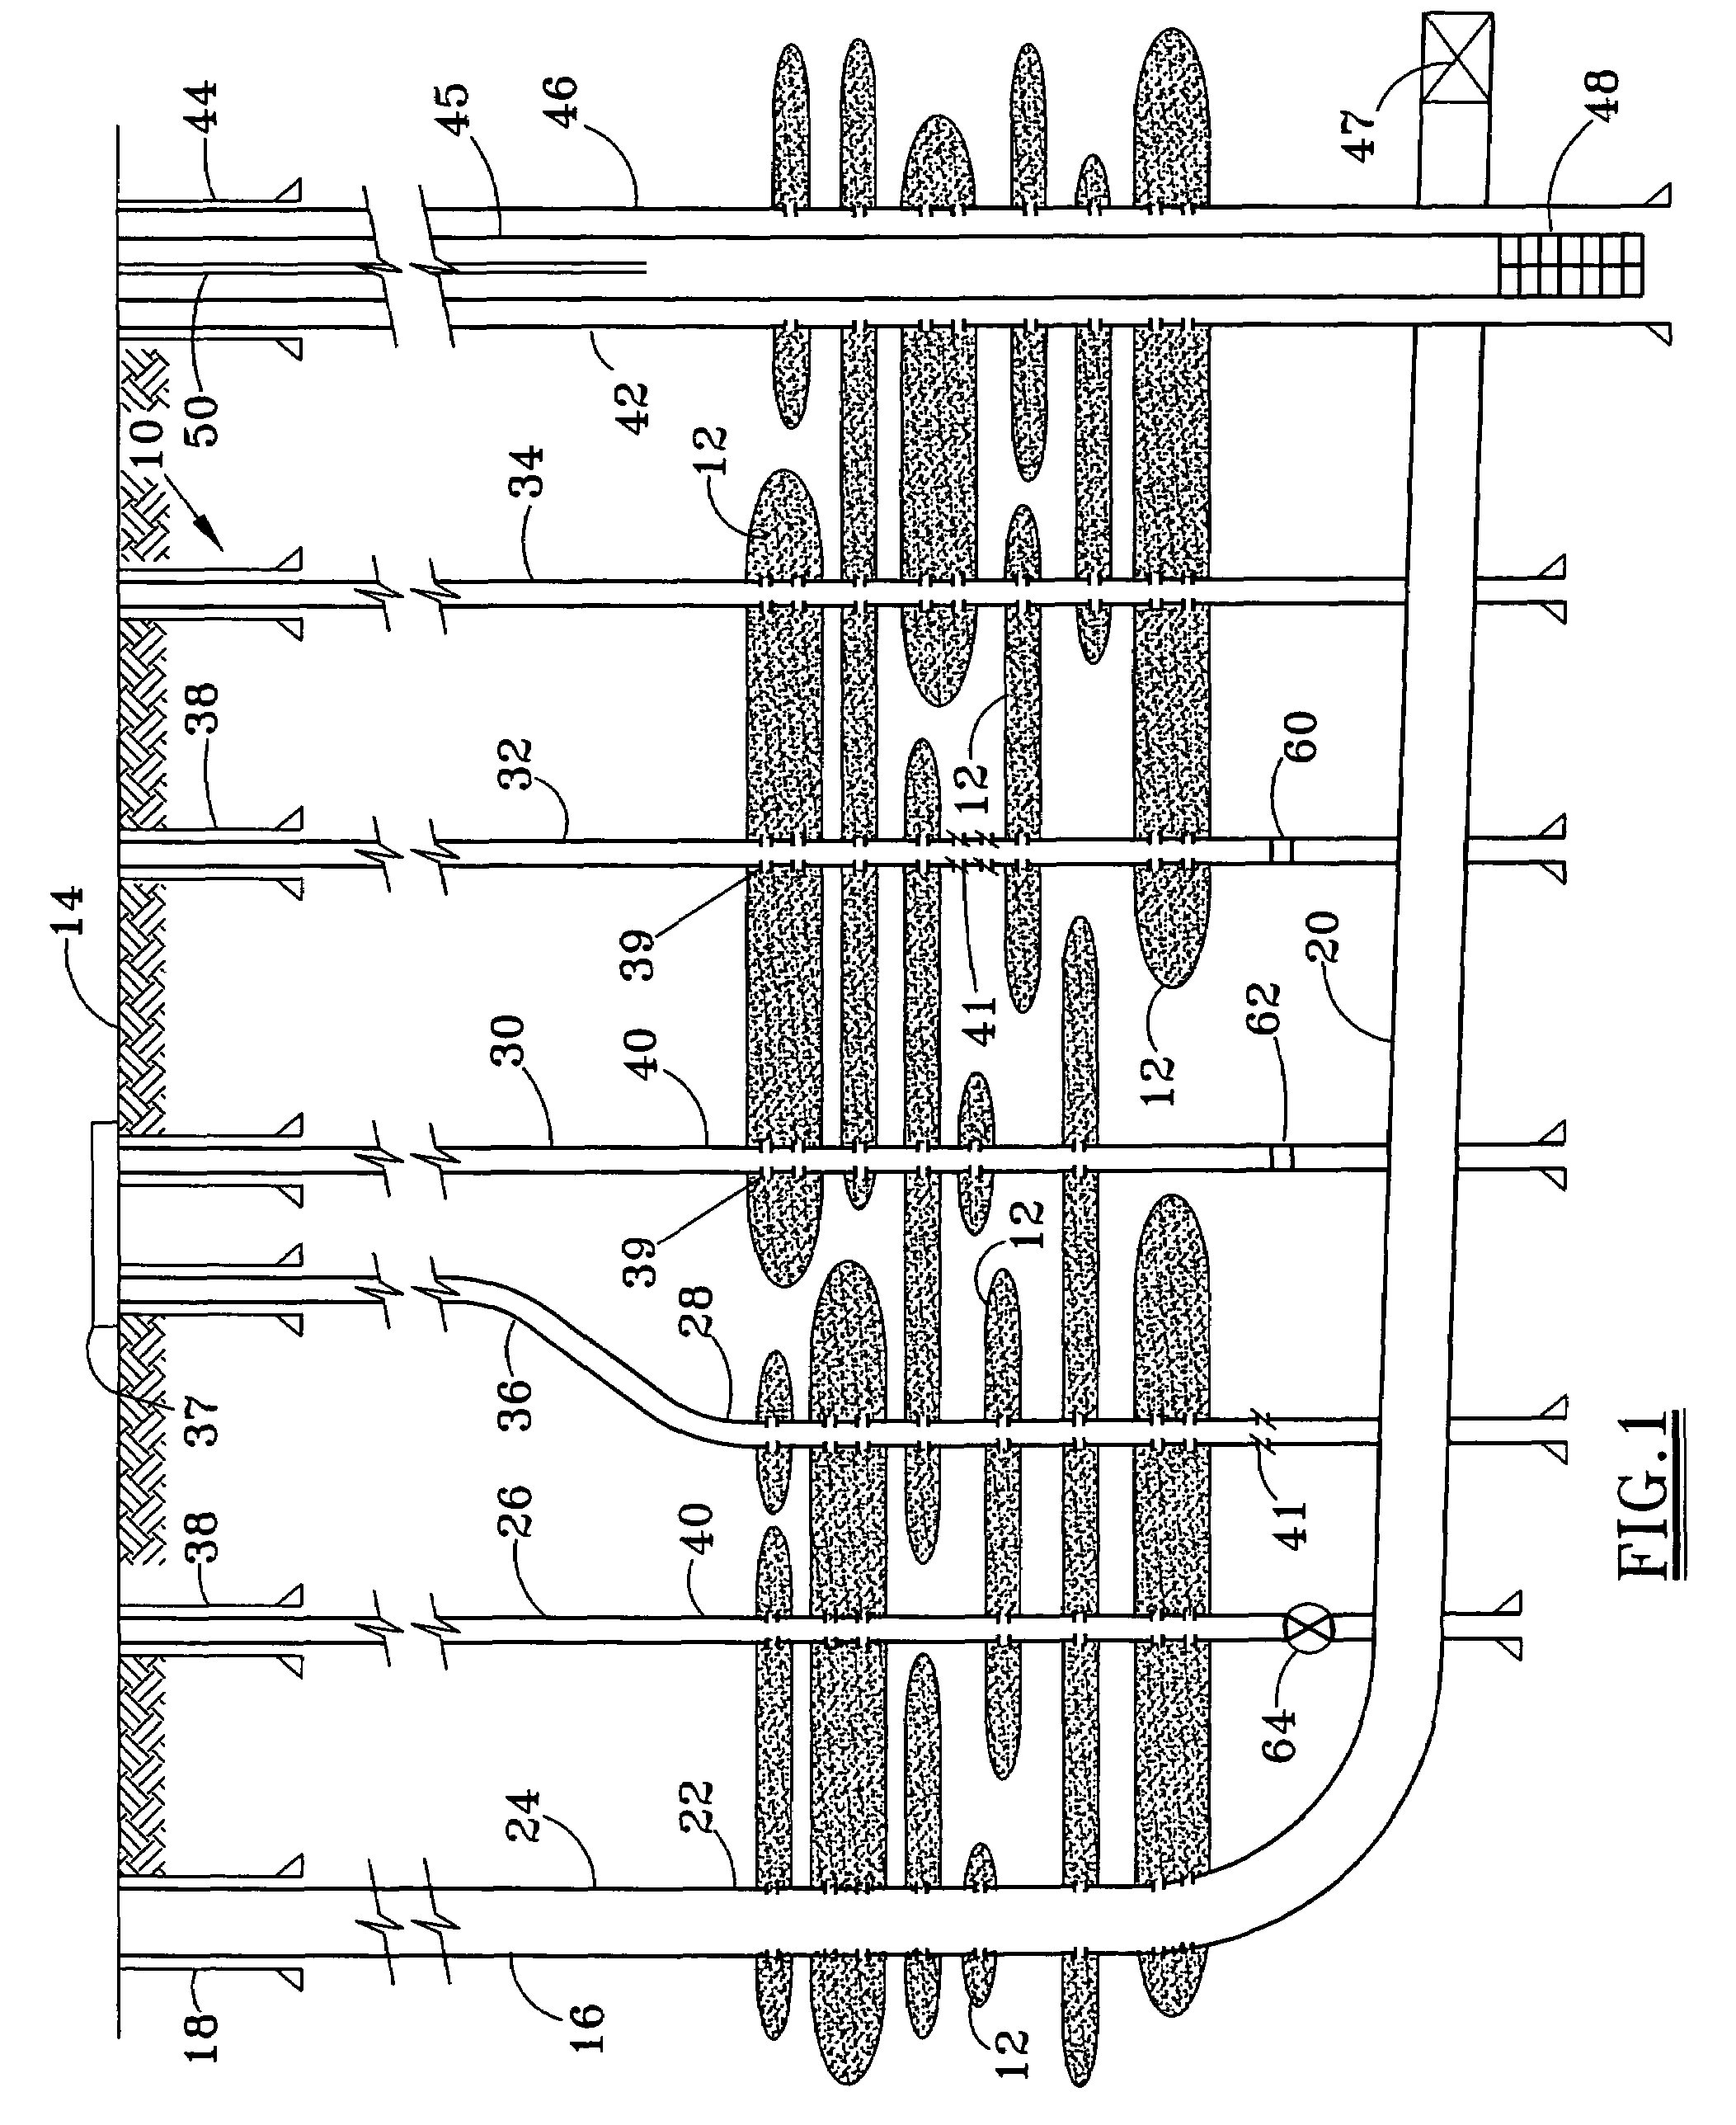 System and method for producing fluids from a subterranean formation